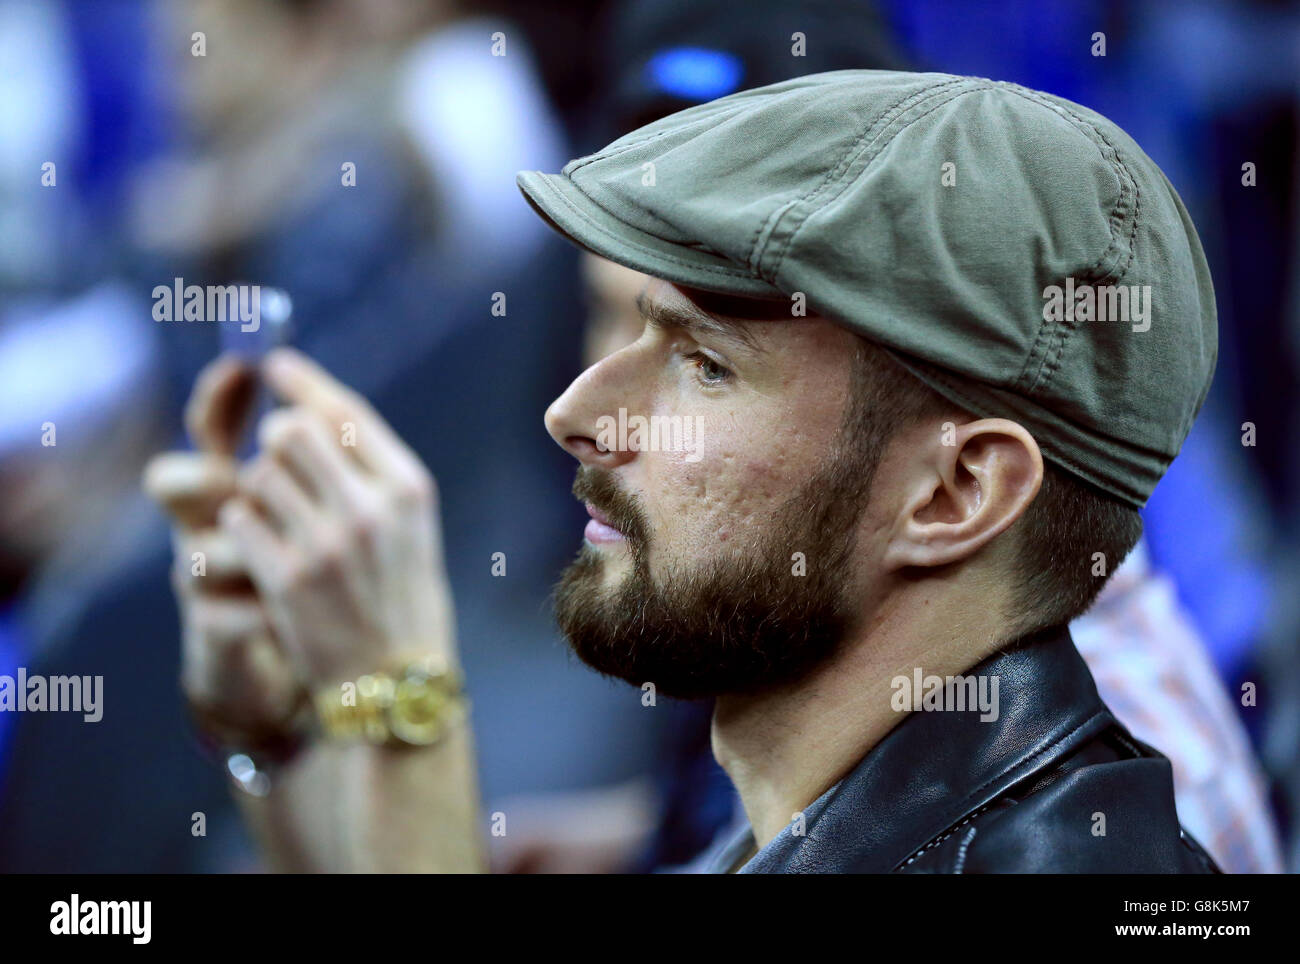 Arsenal's Olivier Giroud attending the NBA Global Games match at the O2 Arena, London. Stock Photo